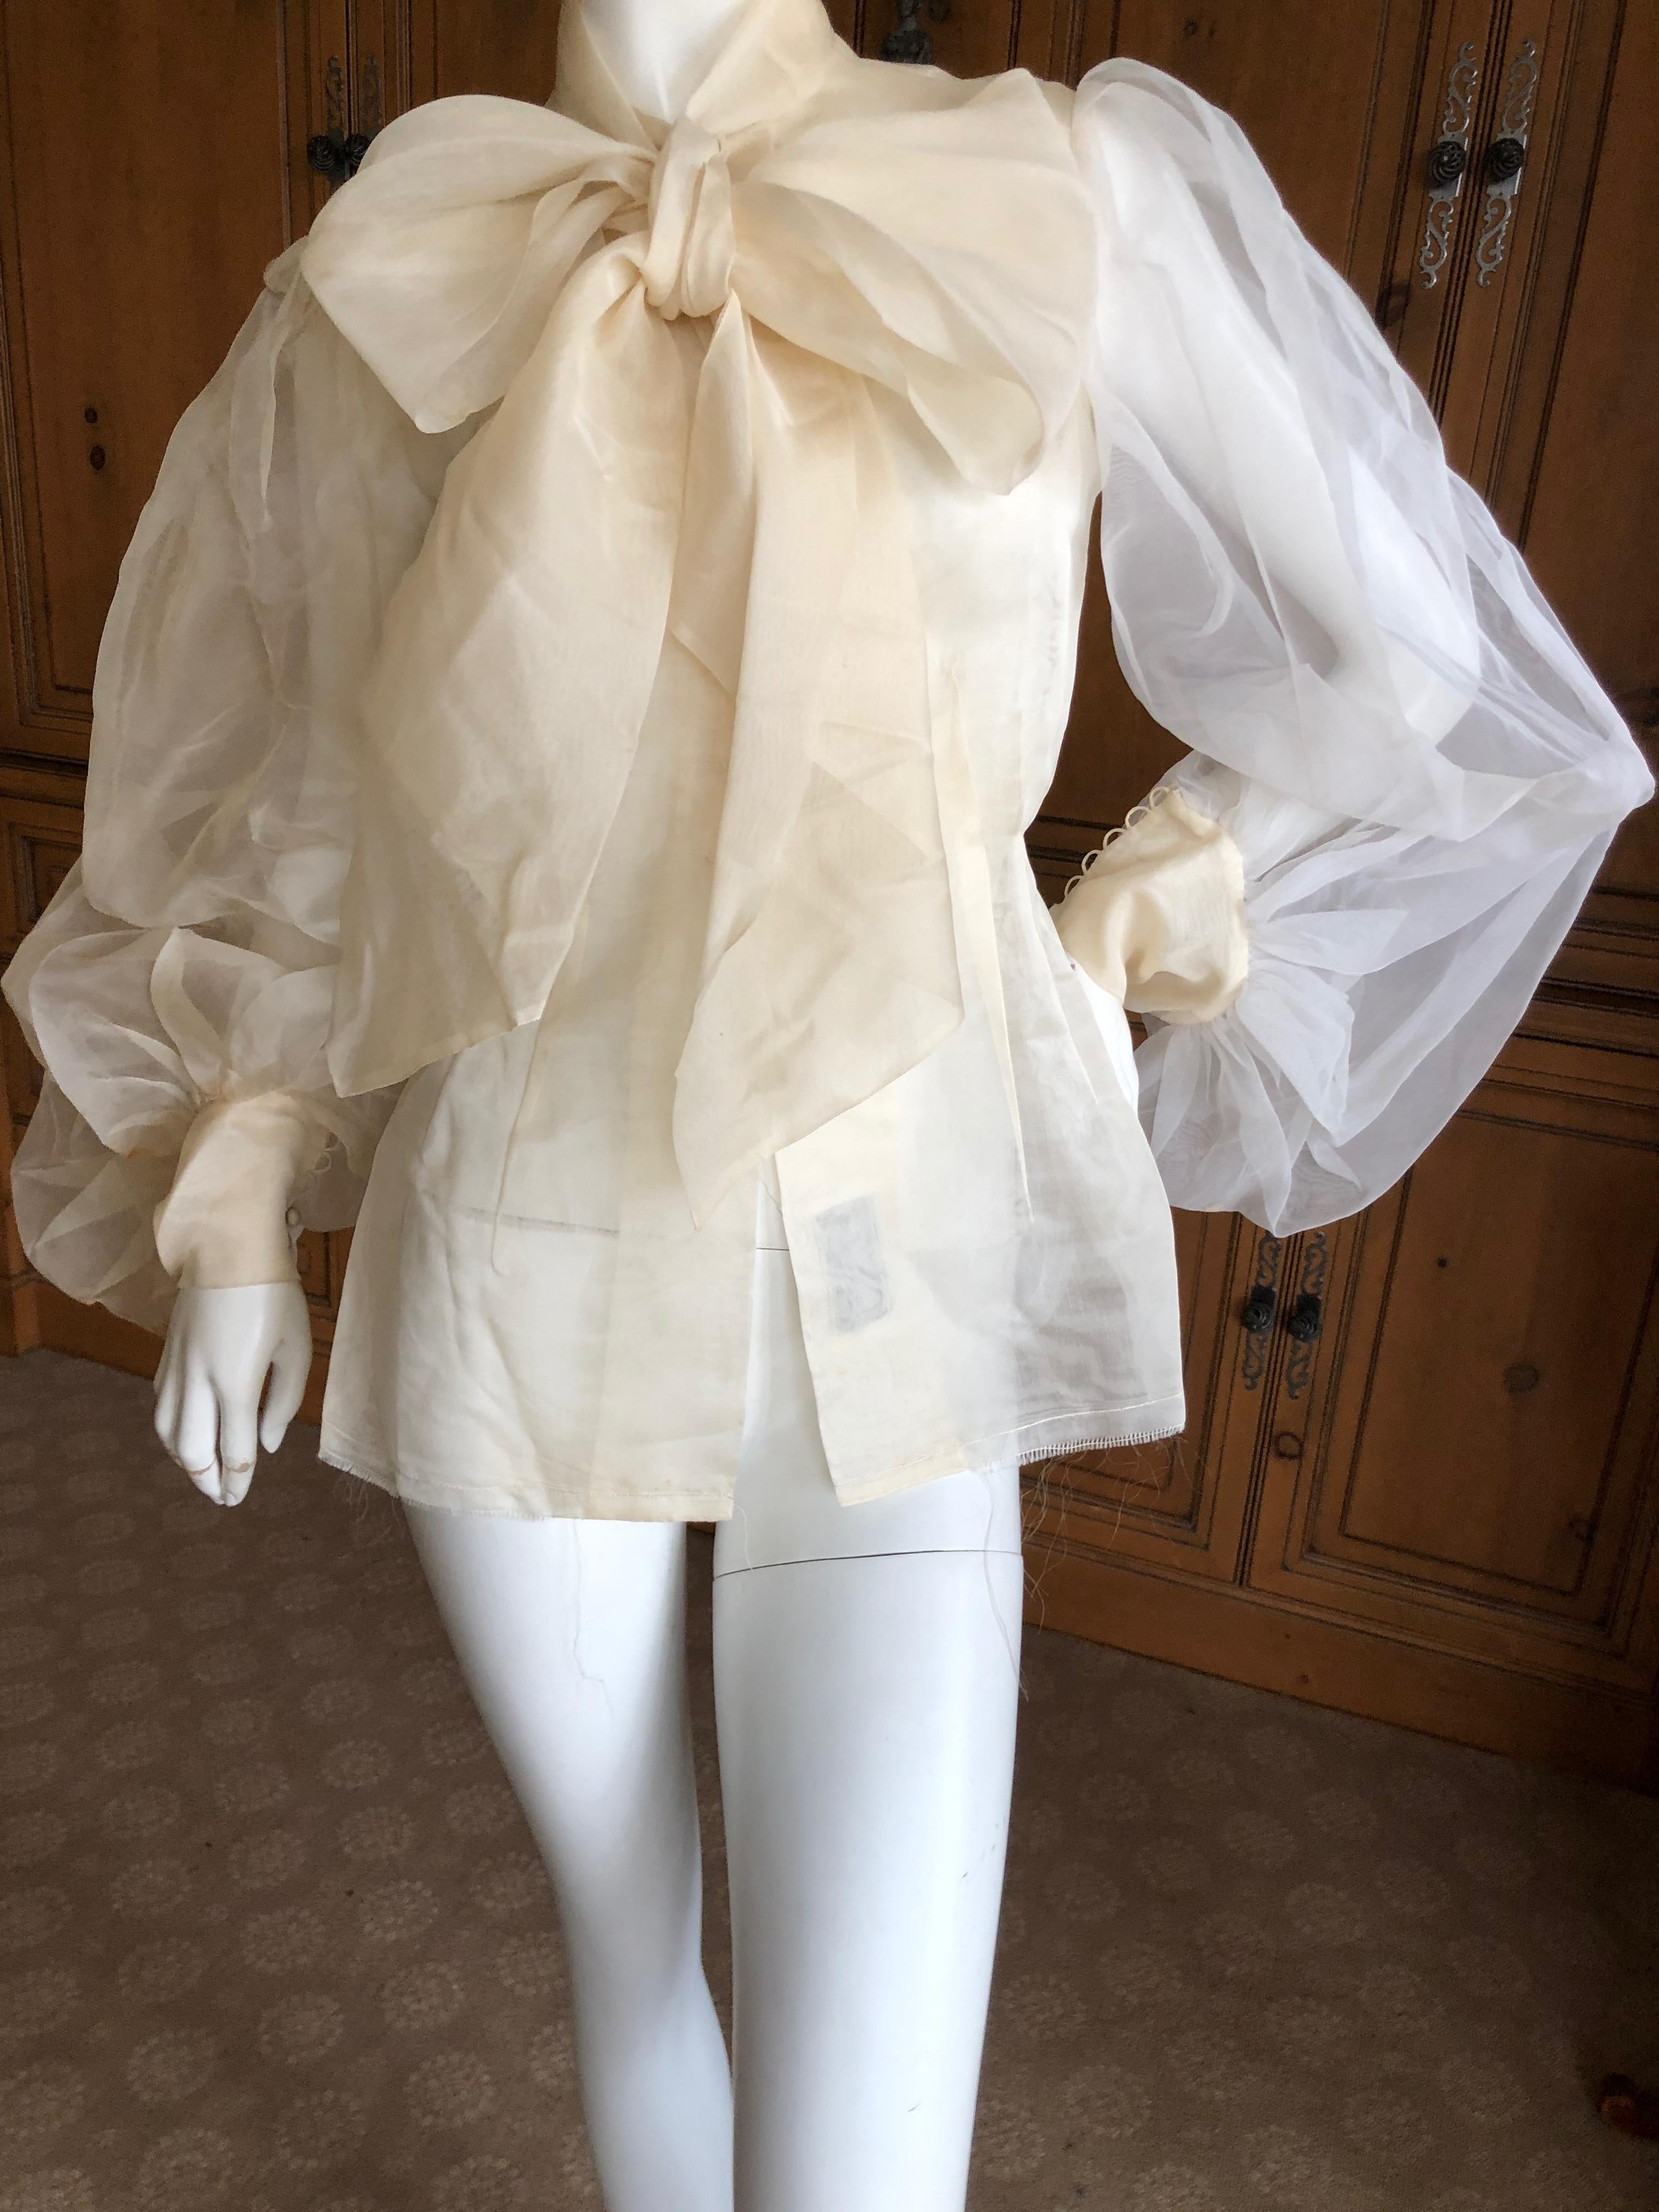 Cardinali Sheer Ivory Silk Bluse with Dramatic Sleeves and Bow  Fall 1971 

From the Archive of Marilyn Lewis, the creator of Cardinali
Cardinali was founded in Los Angeles in 1970, by Marilyn Lewis, who had already found success as the founder and